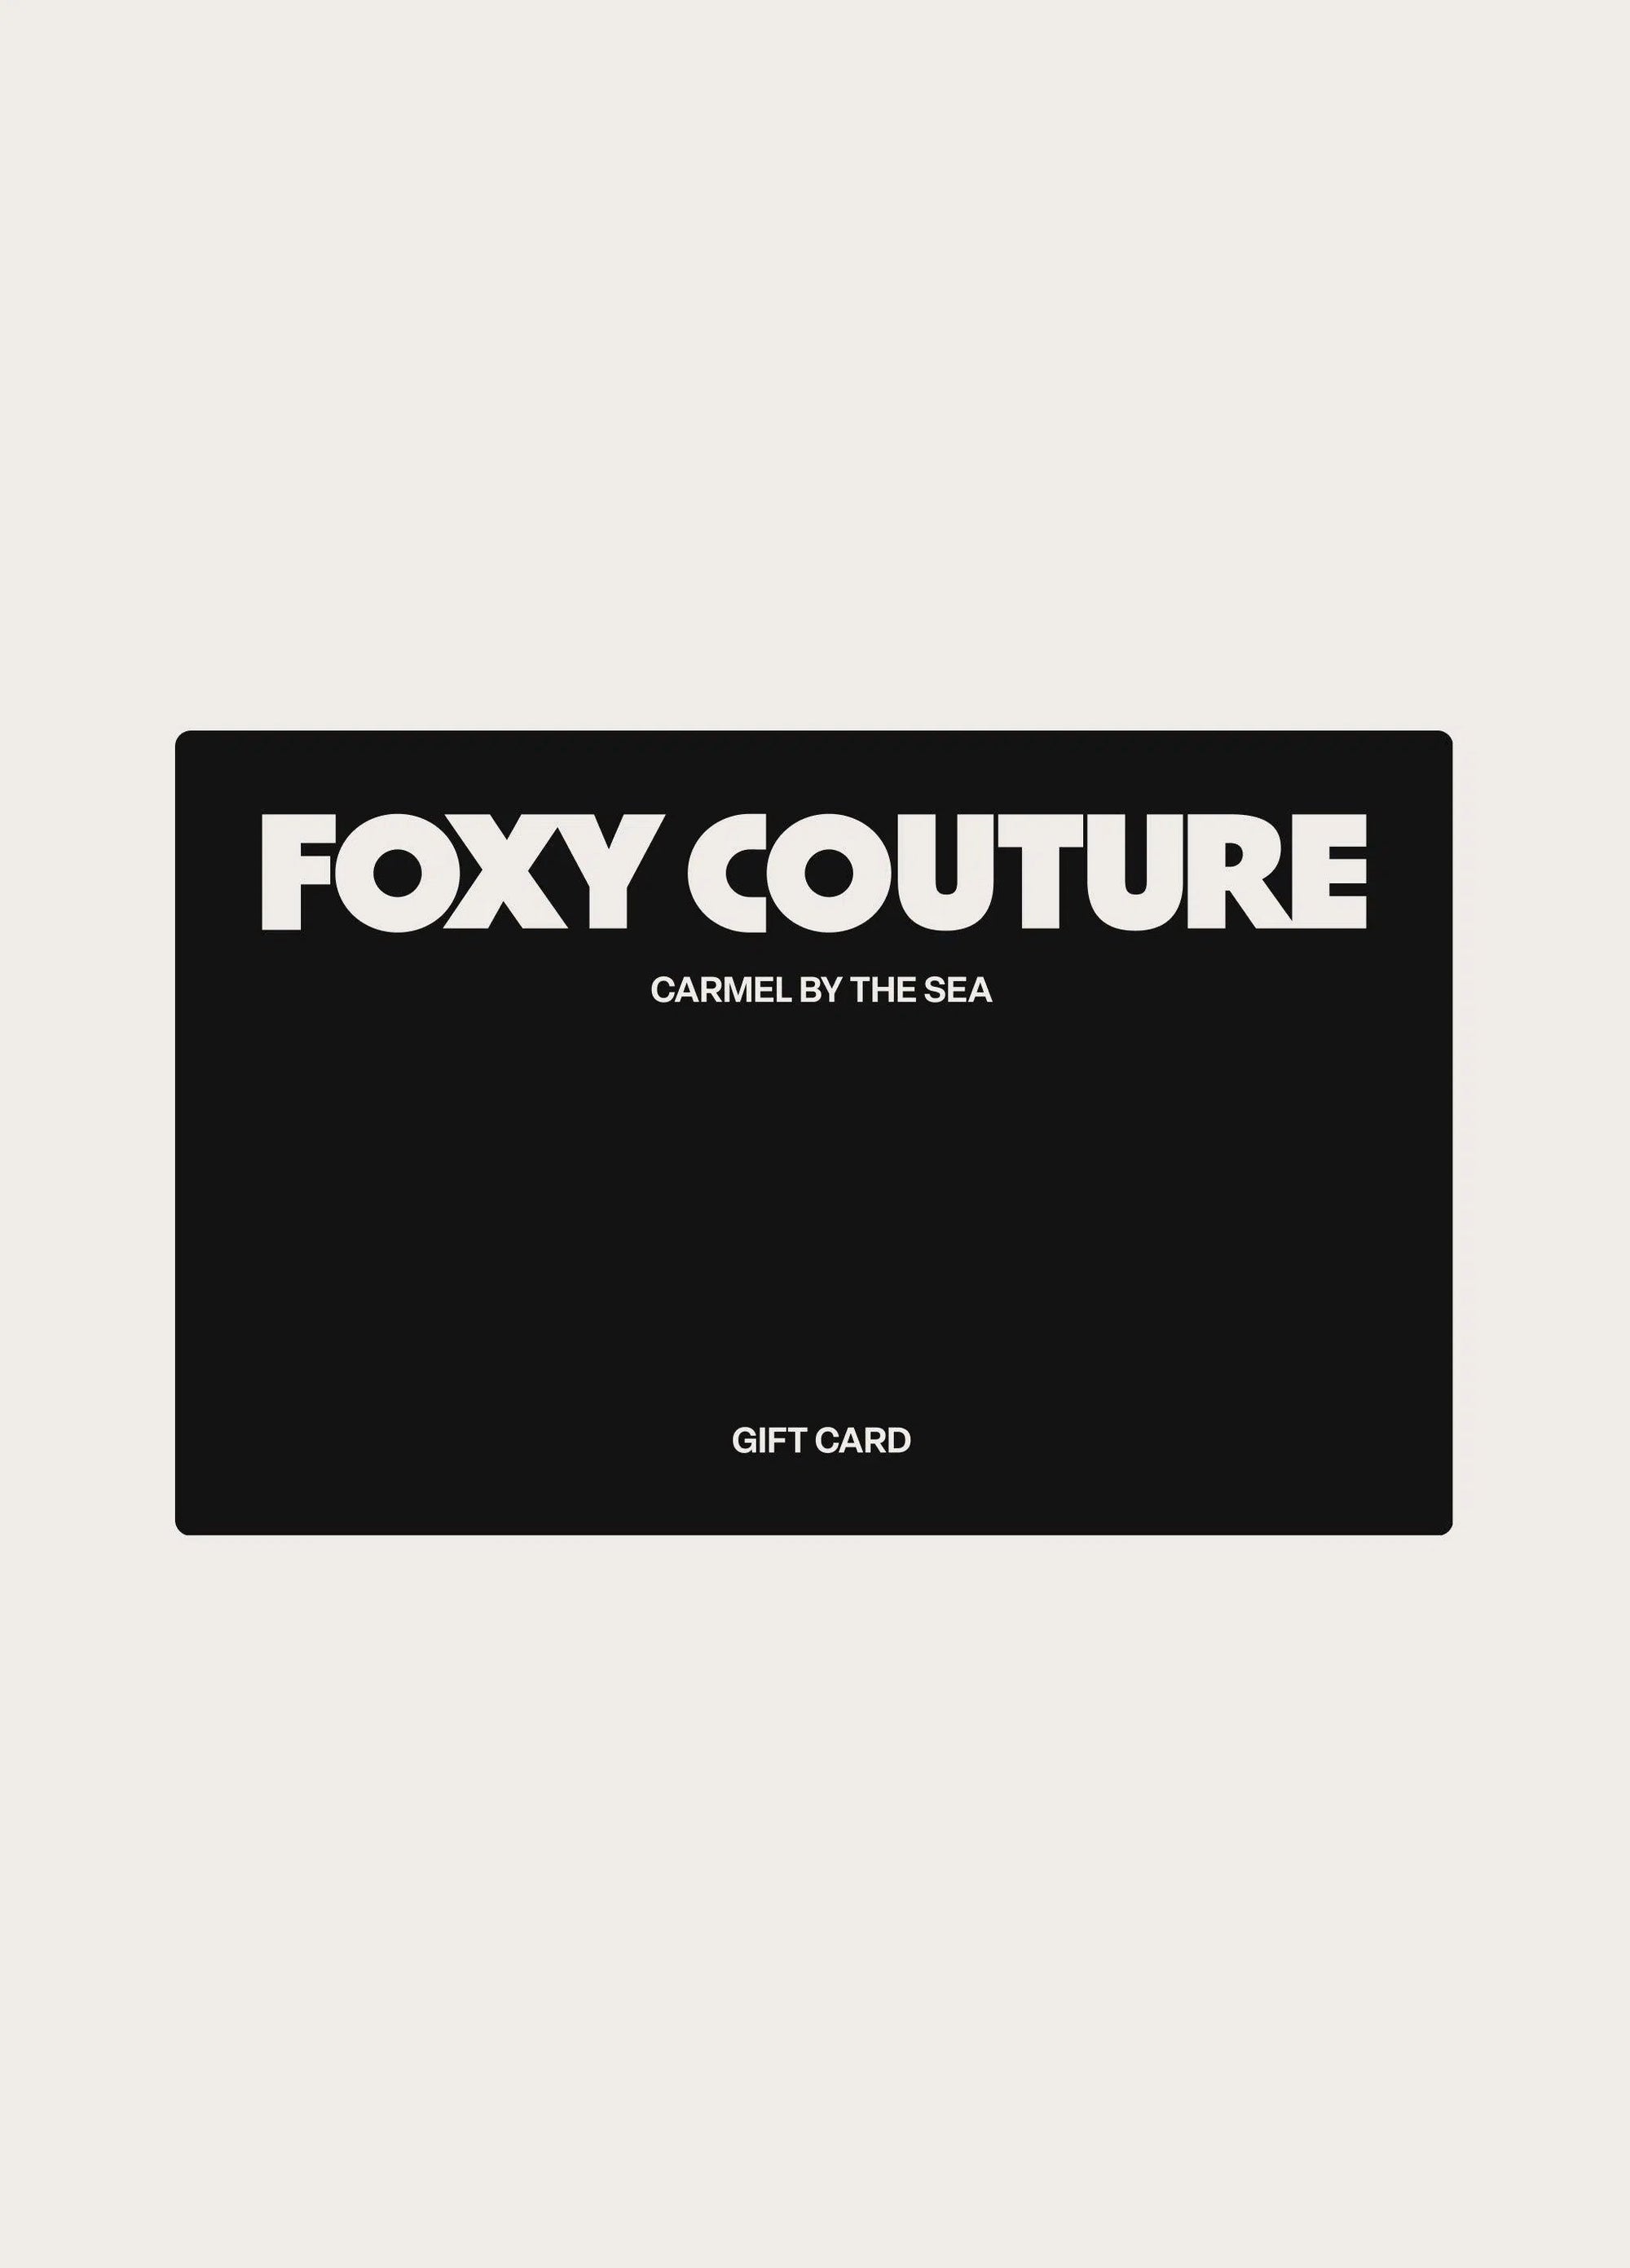 Gift Card - Foxy Couture Carmel